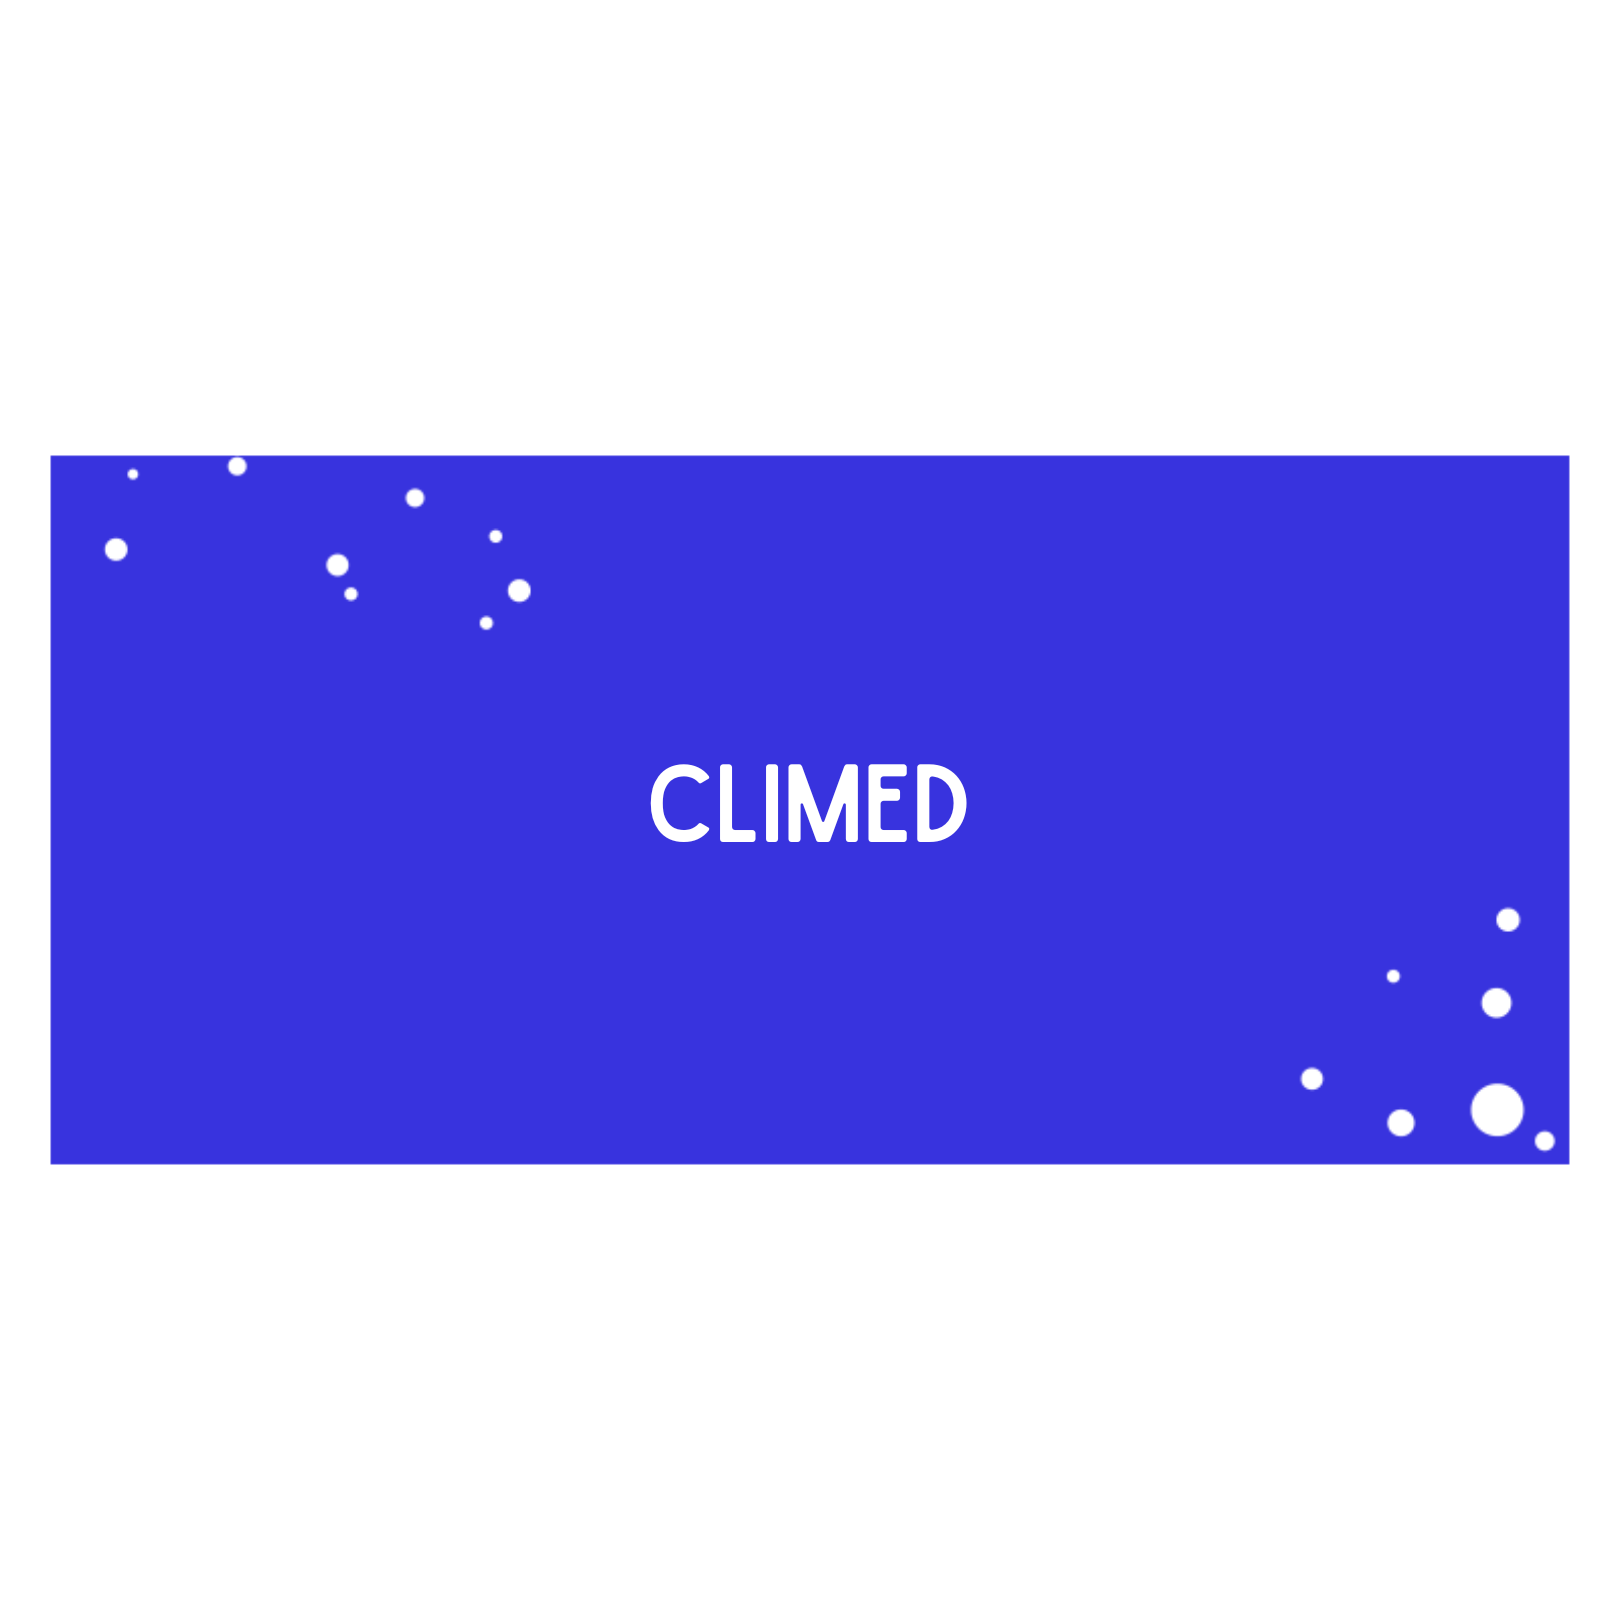 CLIMED